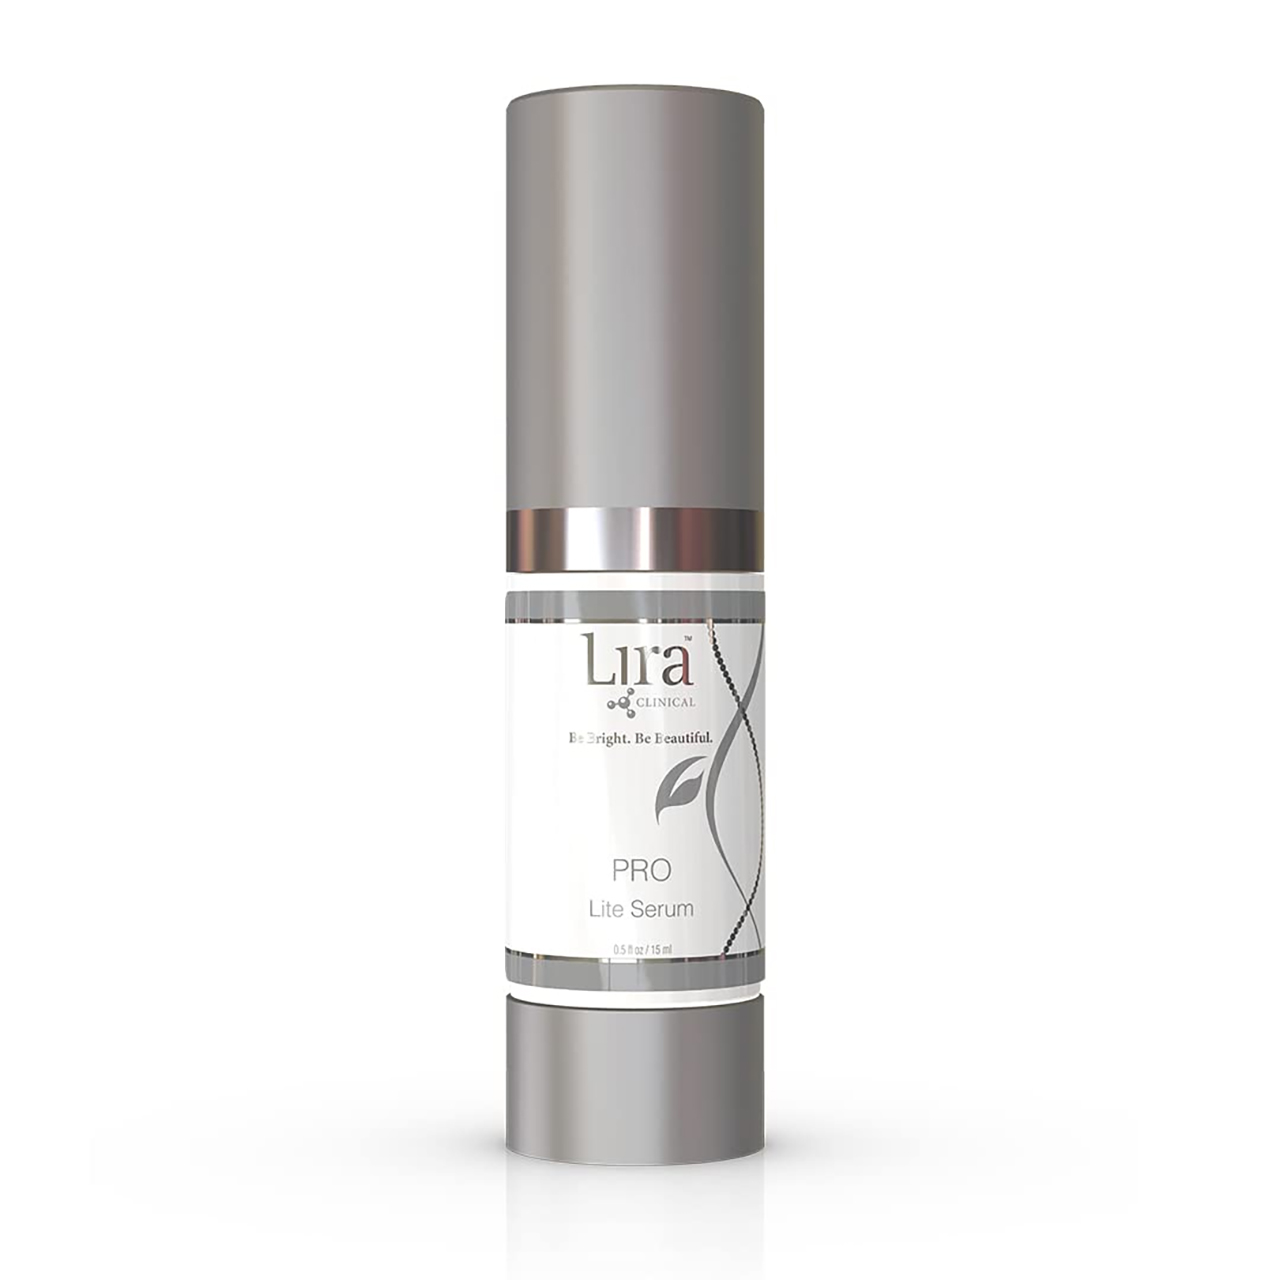 Is there OIL in Lira Clinical PRO Lite Serum?